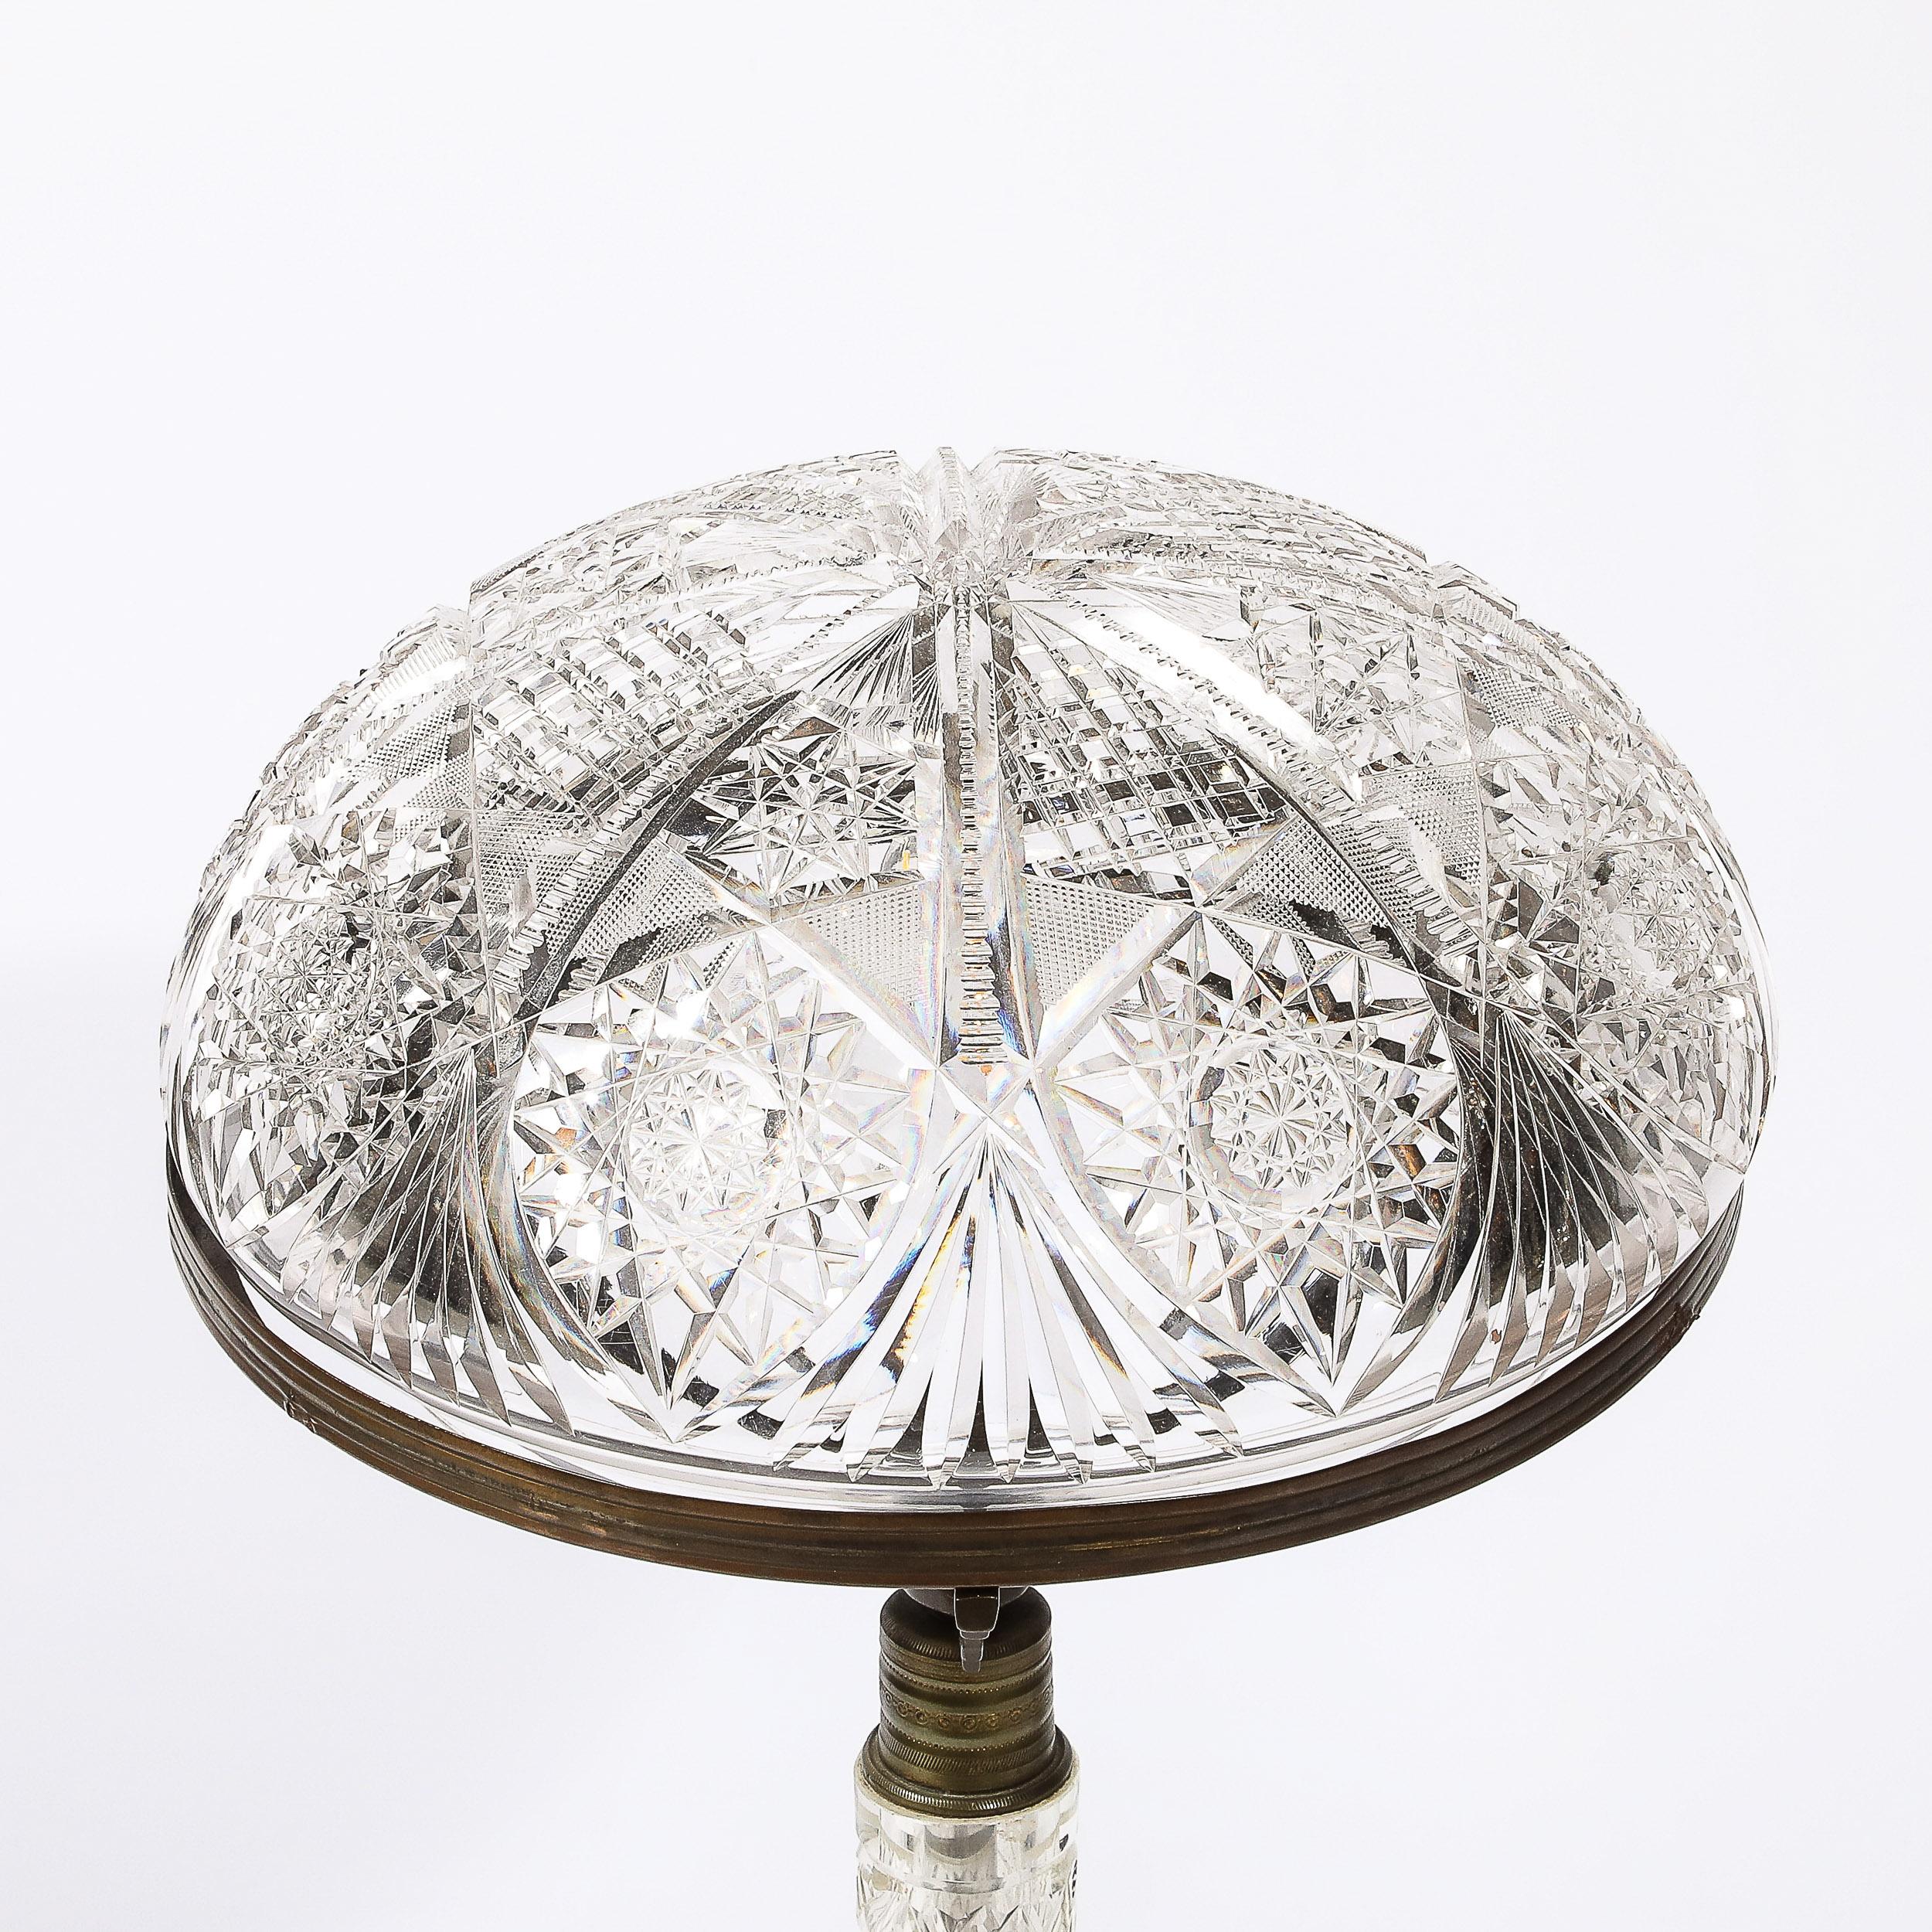 This gleaming Art Deco Table Lamp in Cut Crystal and Bronze originates from the United States, Circa 1925. Features a dome form cut crystal shade with immaculate stylized geometric motifs and elegant detailing, supported by three bronze flanged